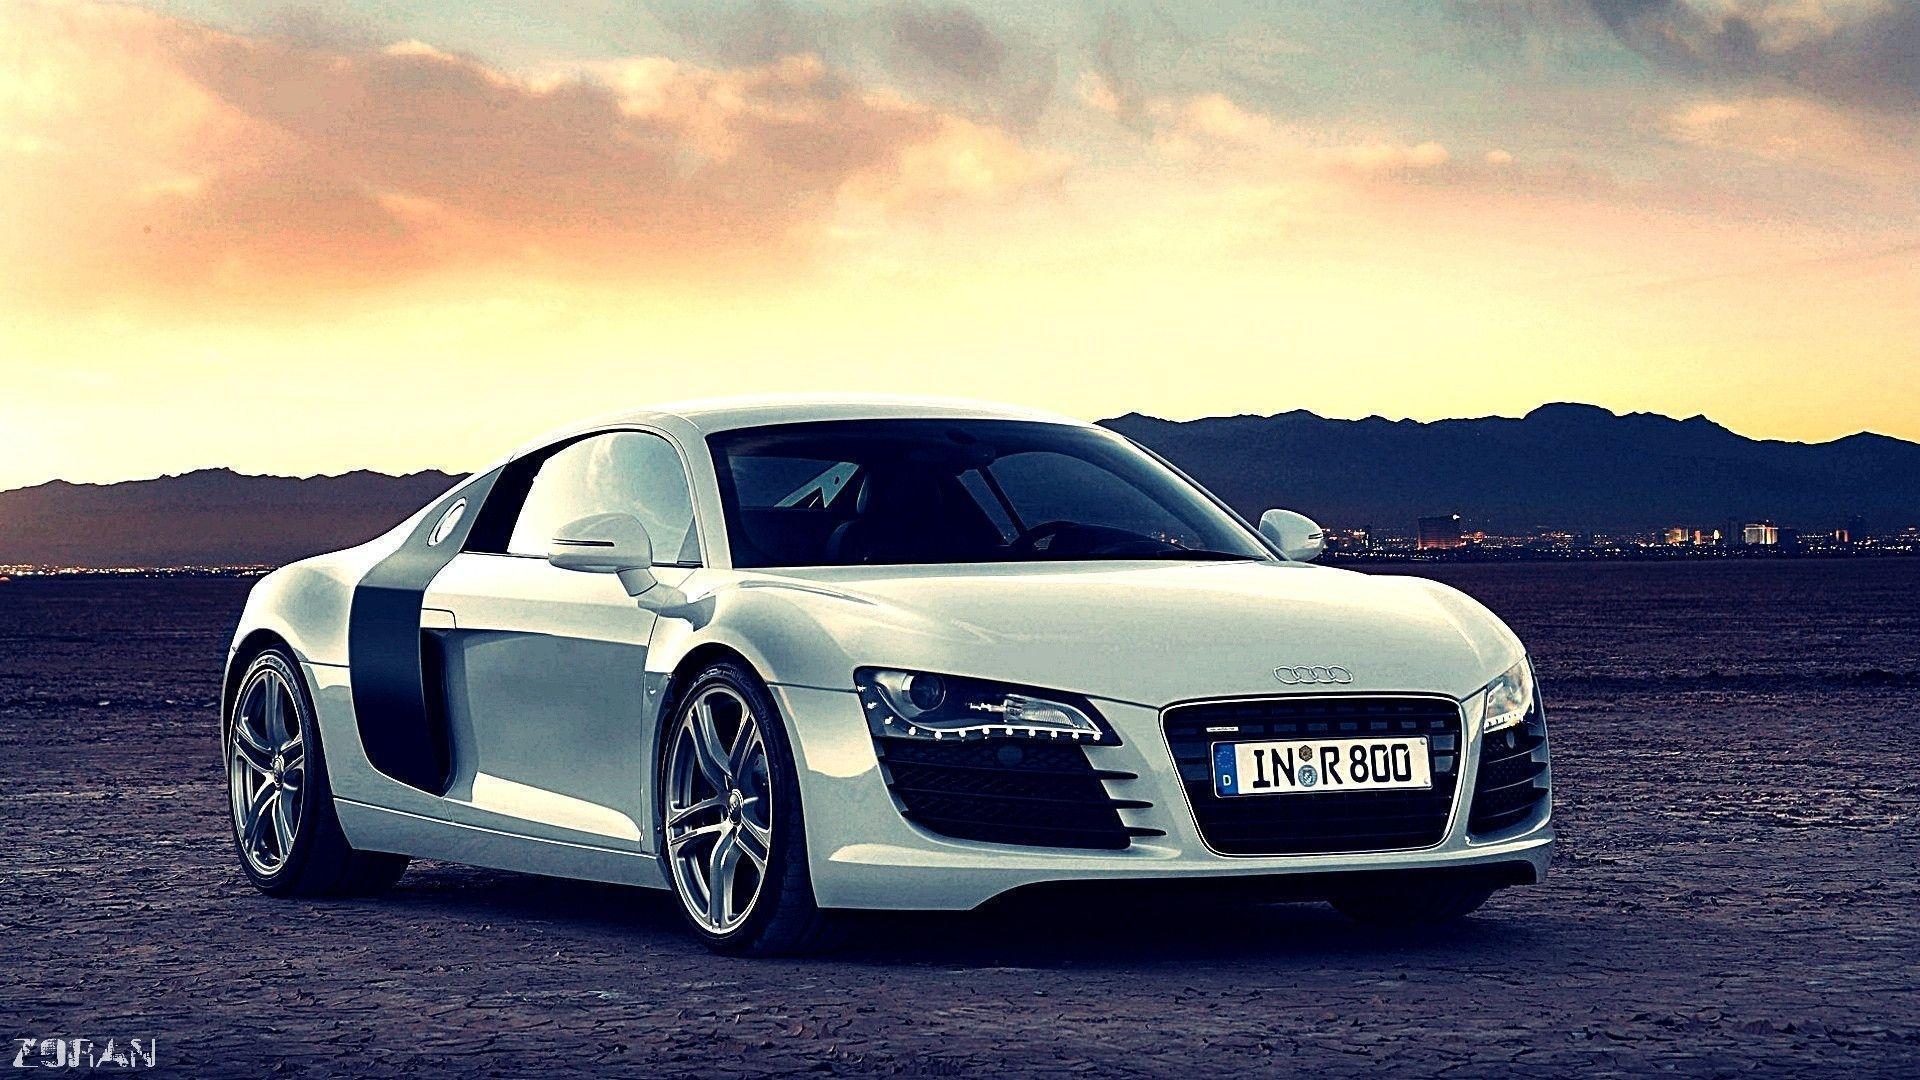 Nothing found for Car Audi R8 Sports Car Wallpaper 1920 1080 Cool